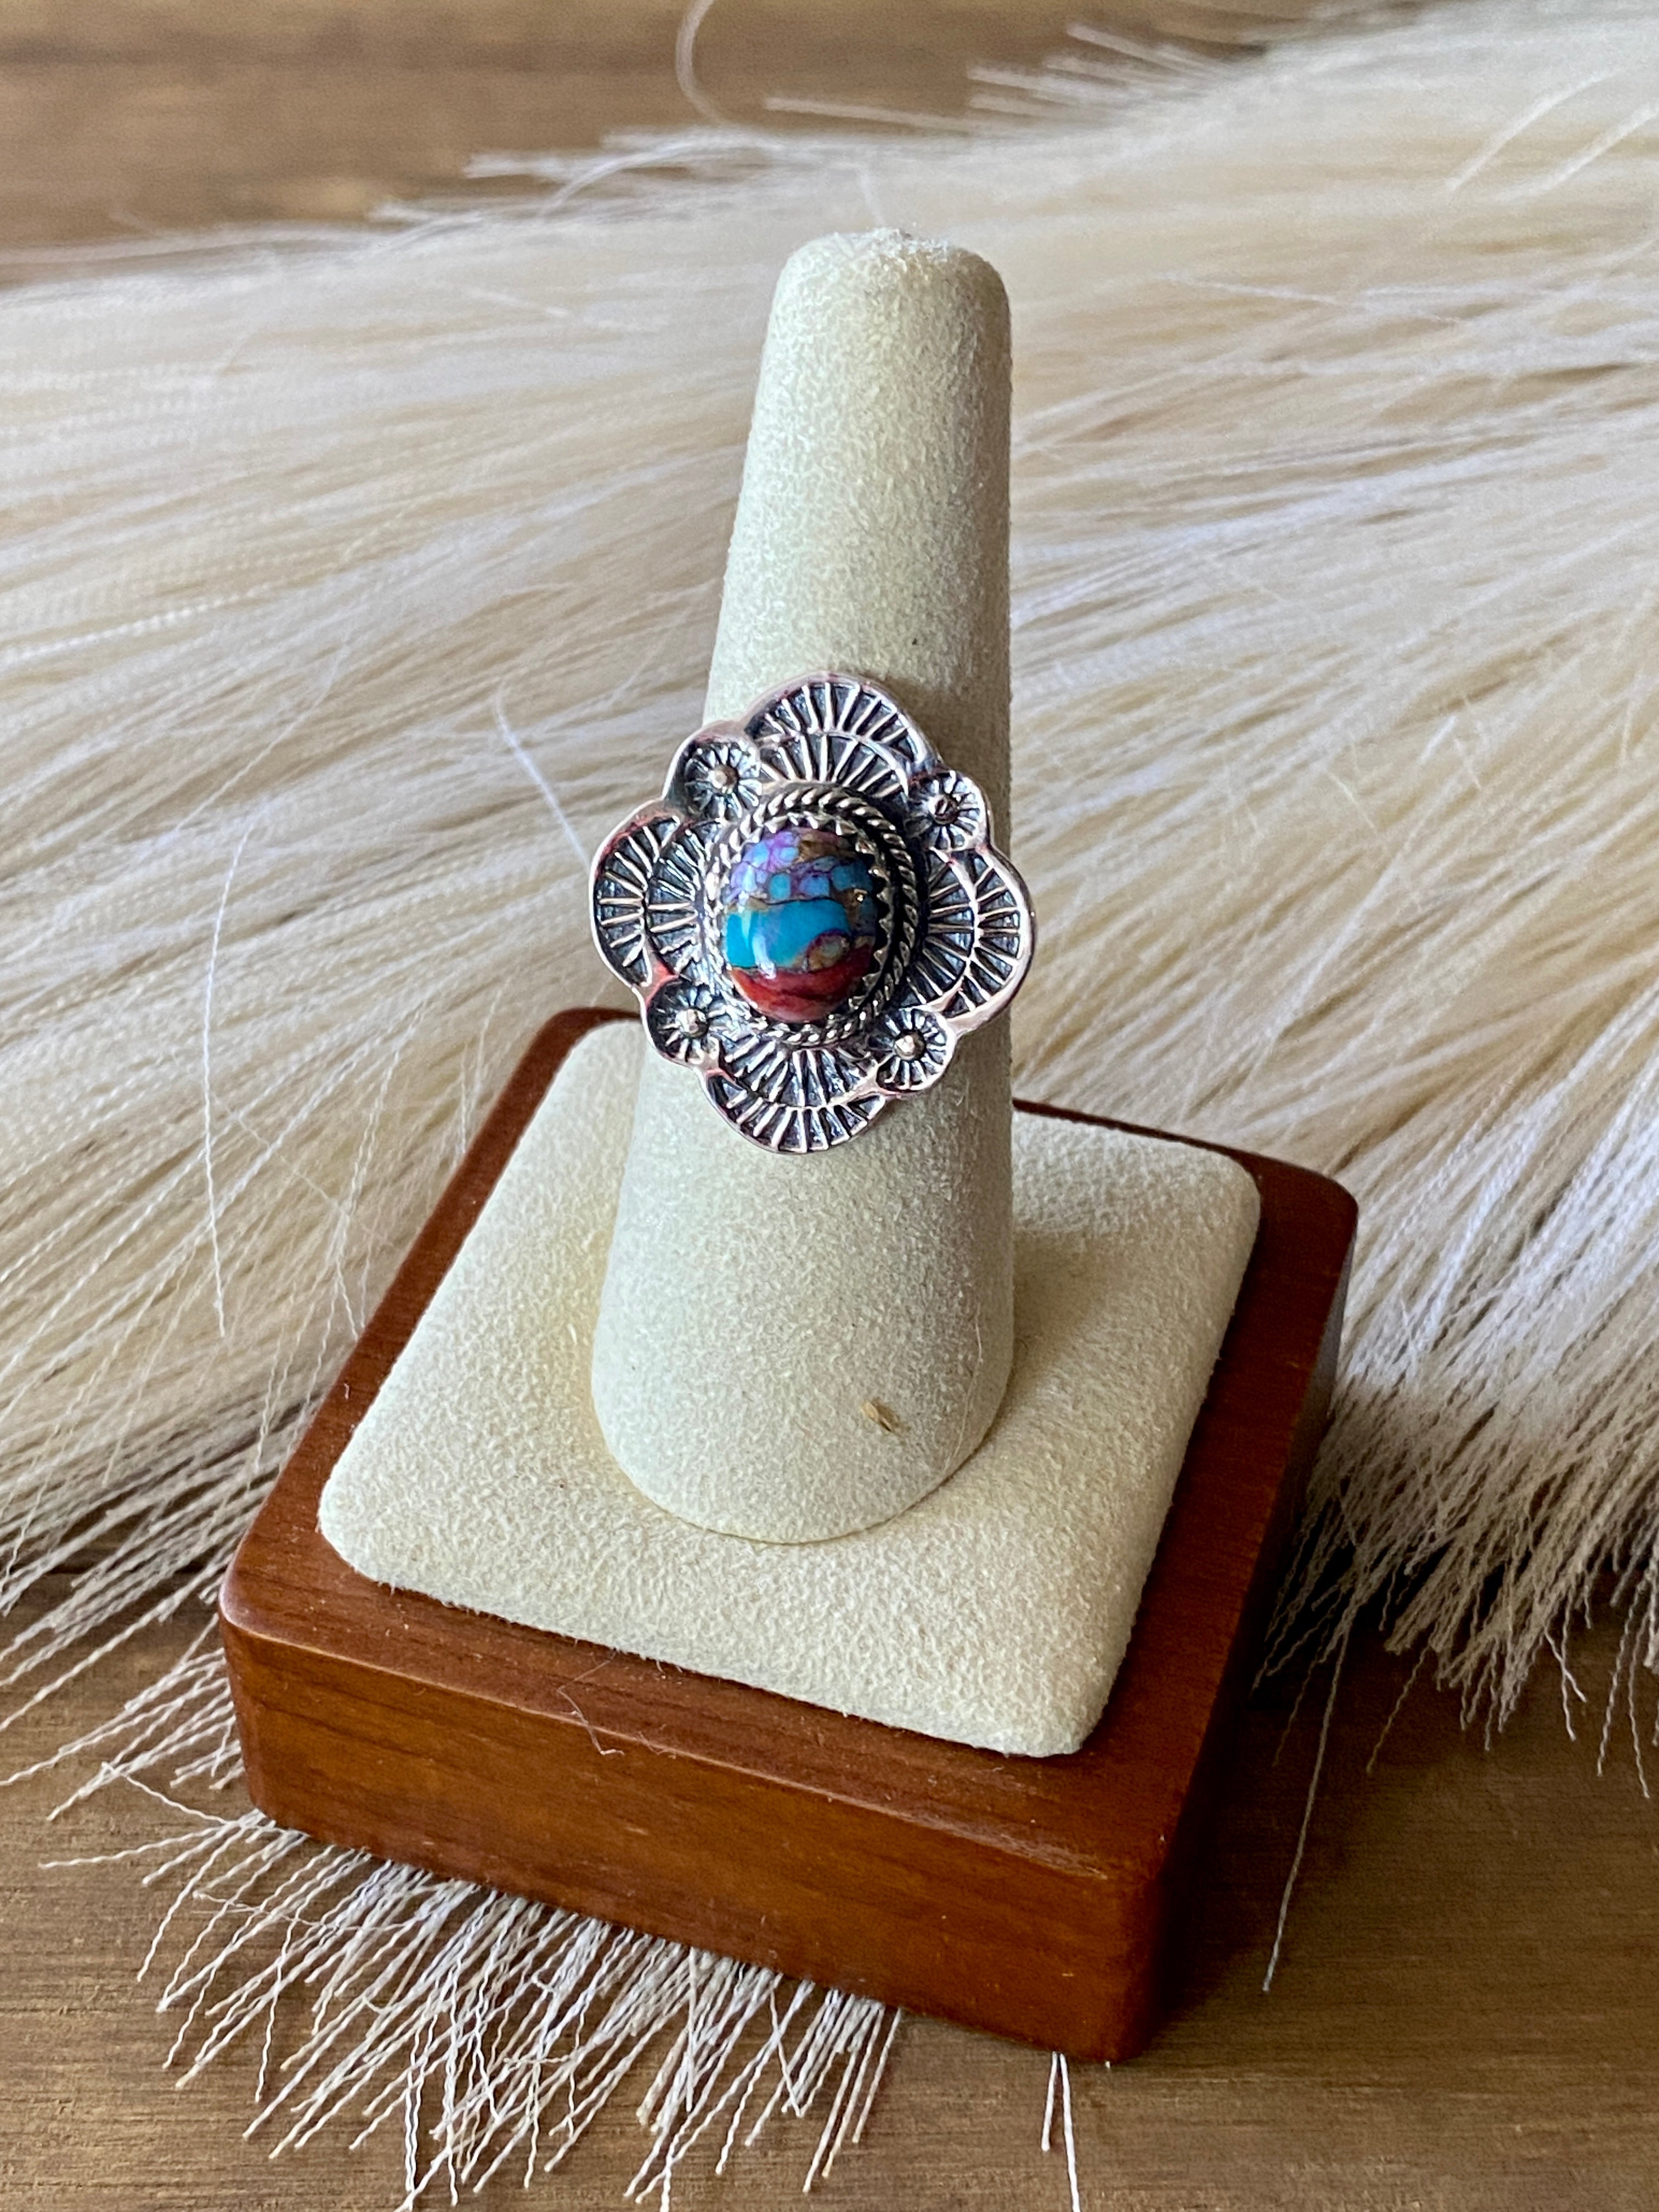 #12 Southwest Handmade Pink Mohave Turquoise & Sterling Silver Ring Size 6.75